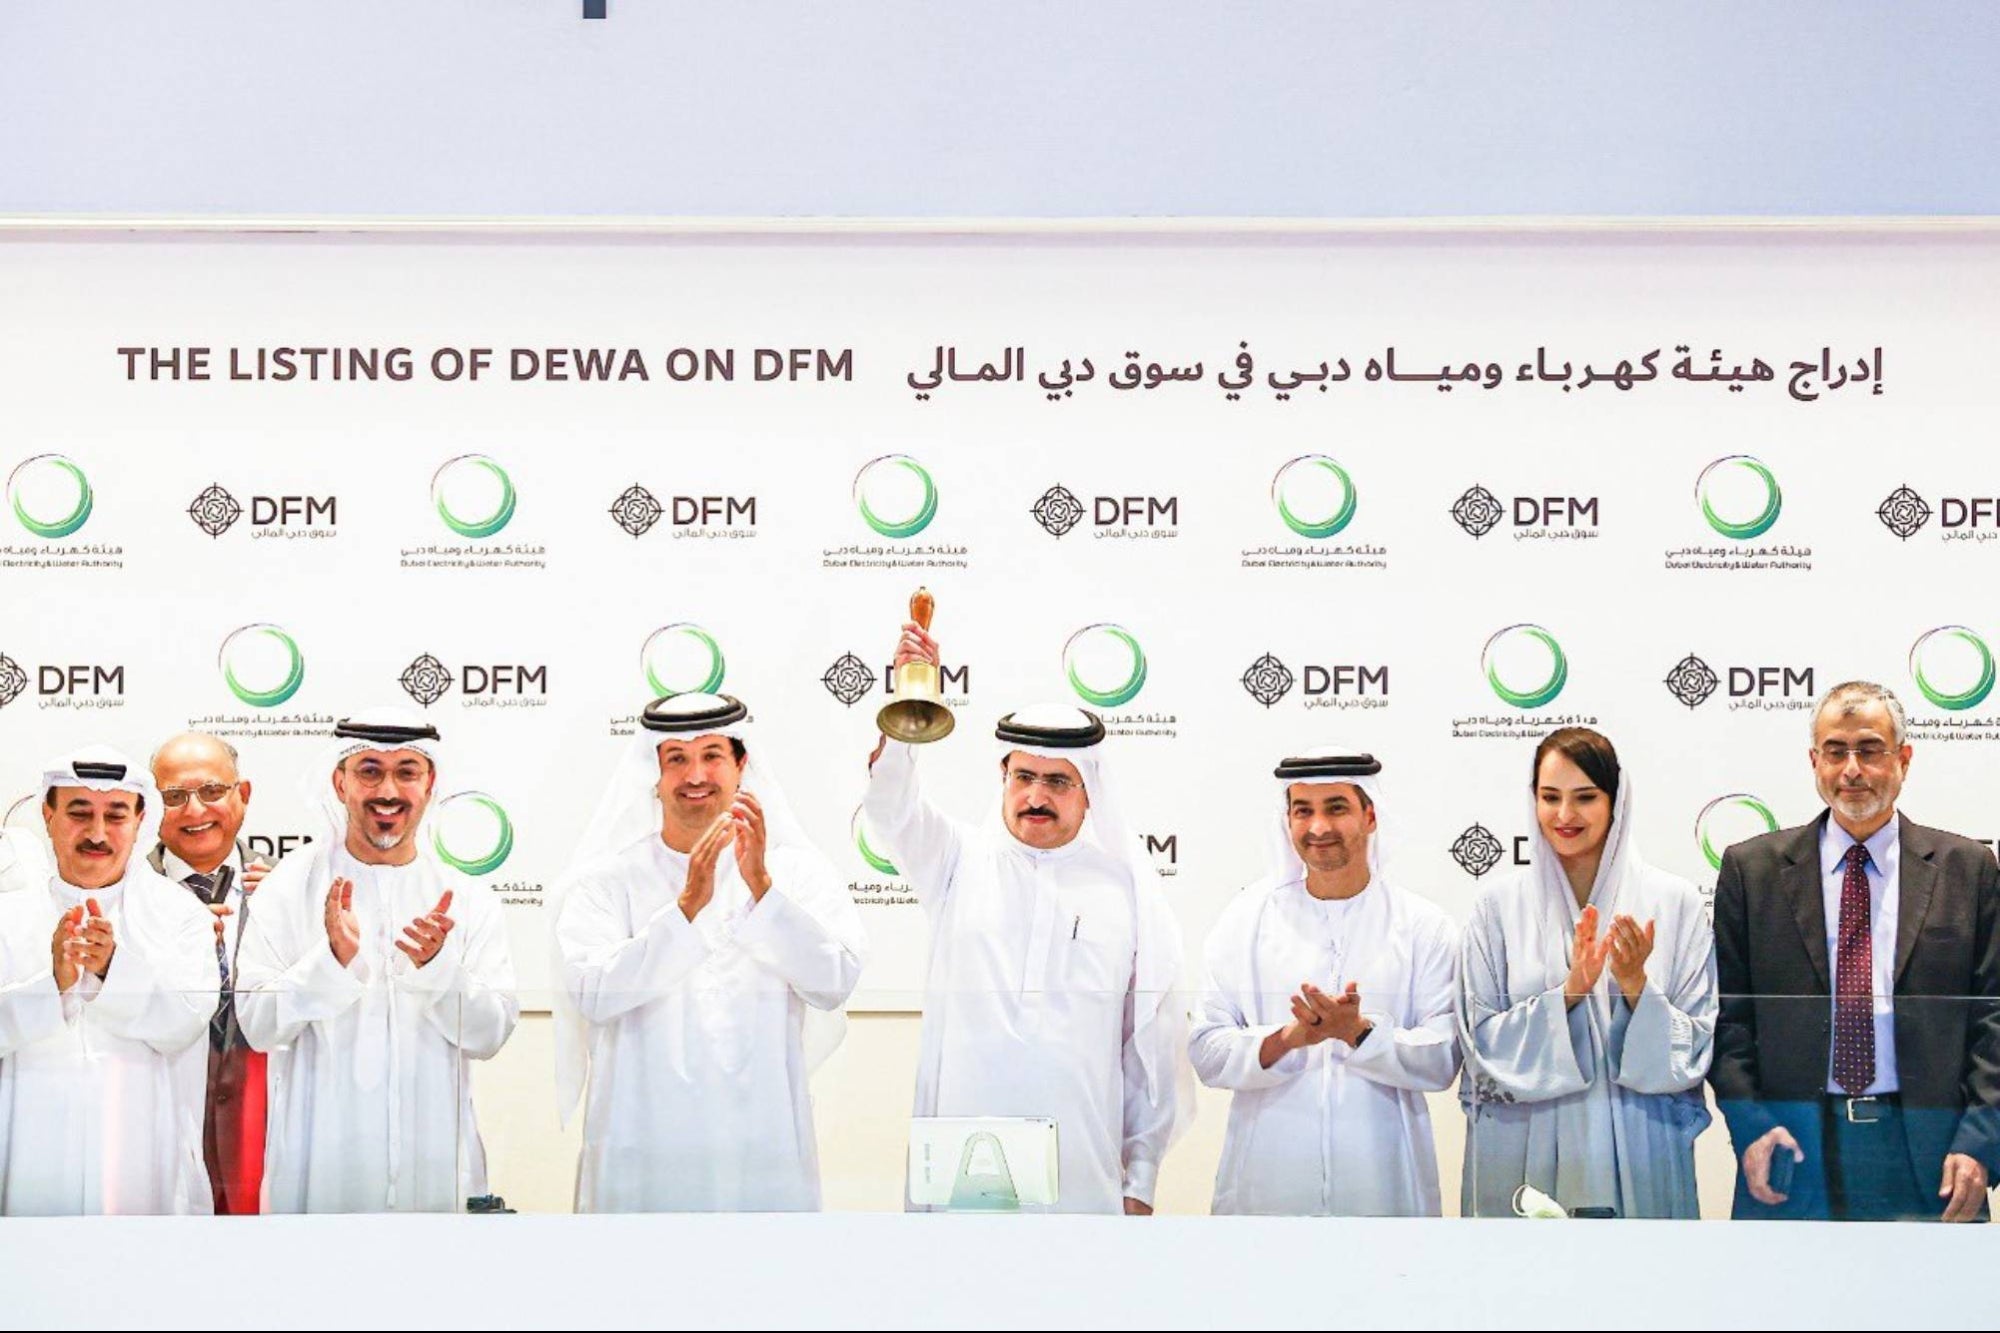 Dubai Electricity And Water Authority's US$6.1 Billion Initial Public Offering Becomes The Largest Ever Listing In The Middle East Since 2019